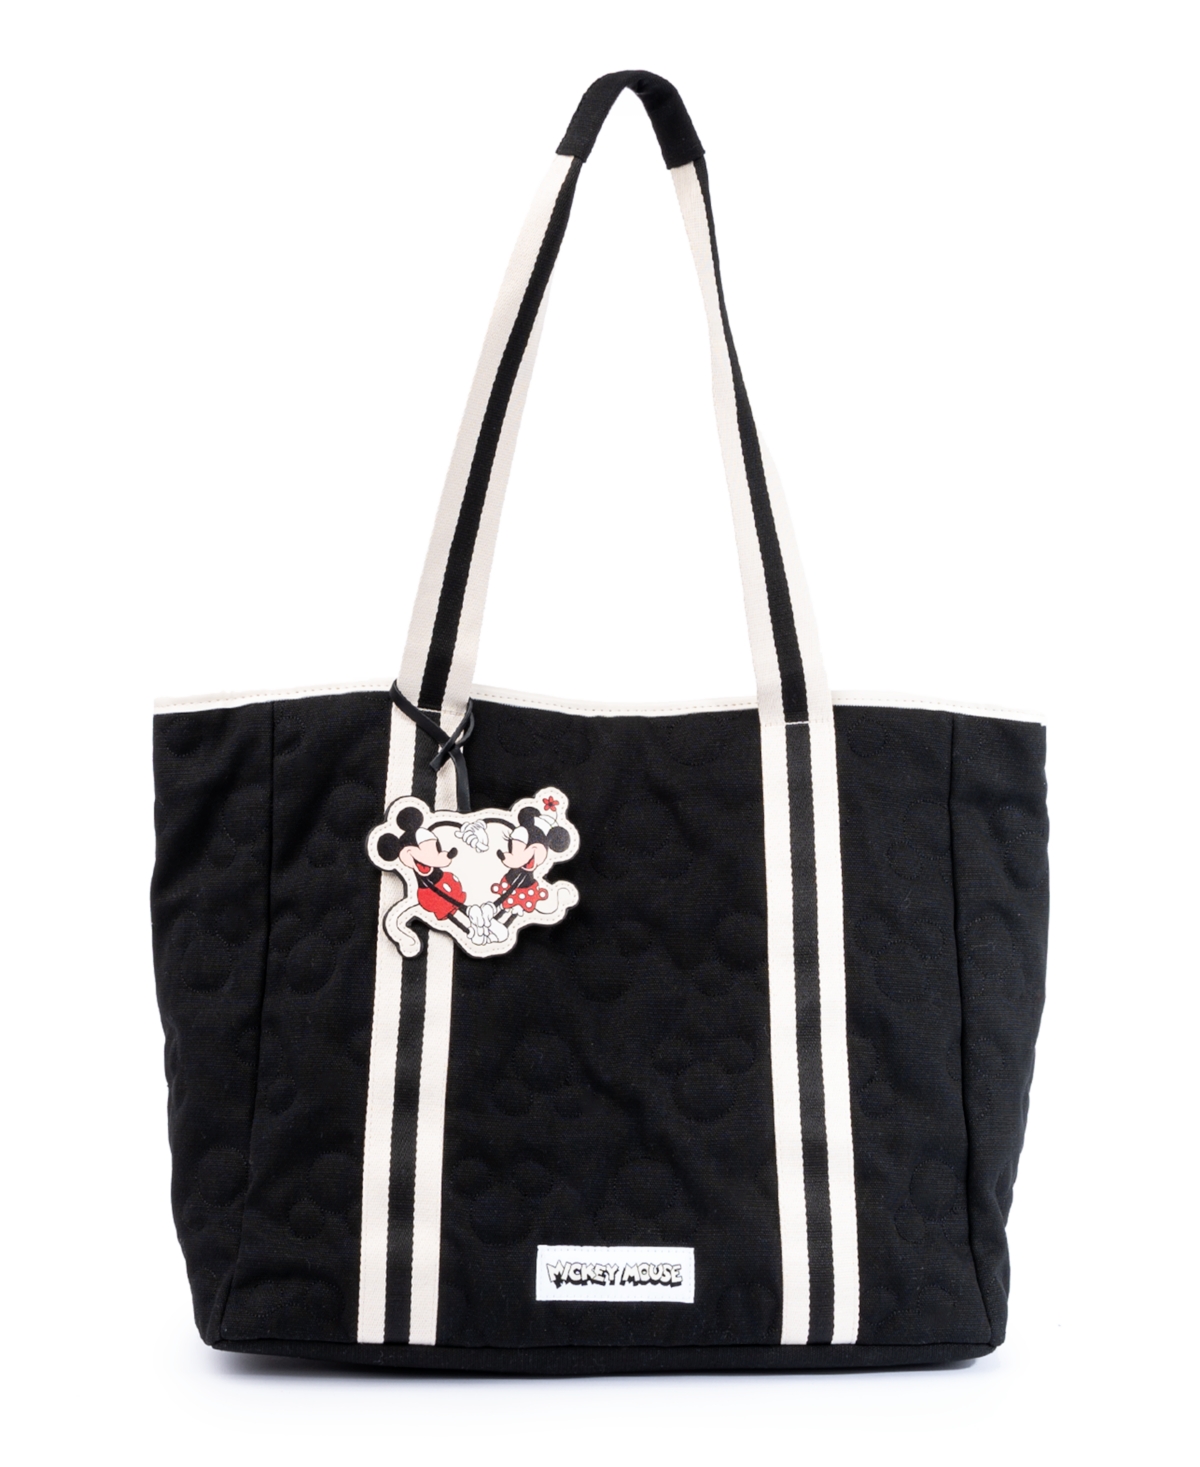 x Disney Mickey Quilted Canvas Tote Bag - Black